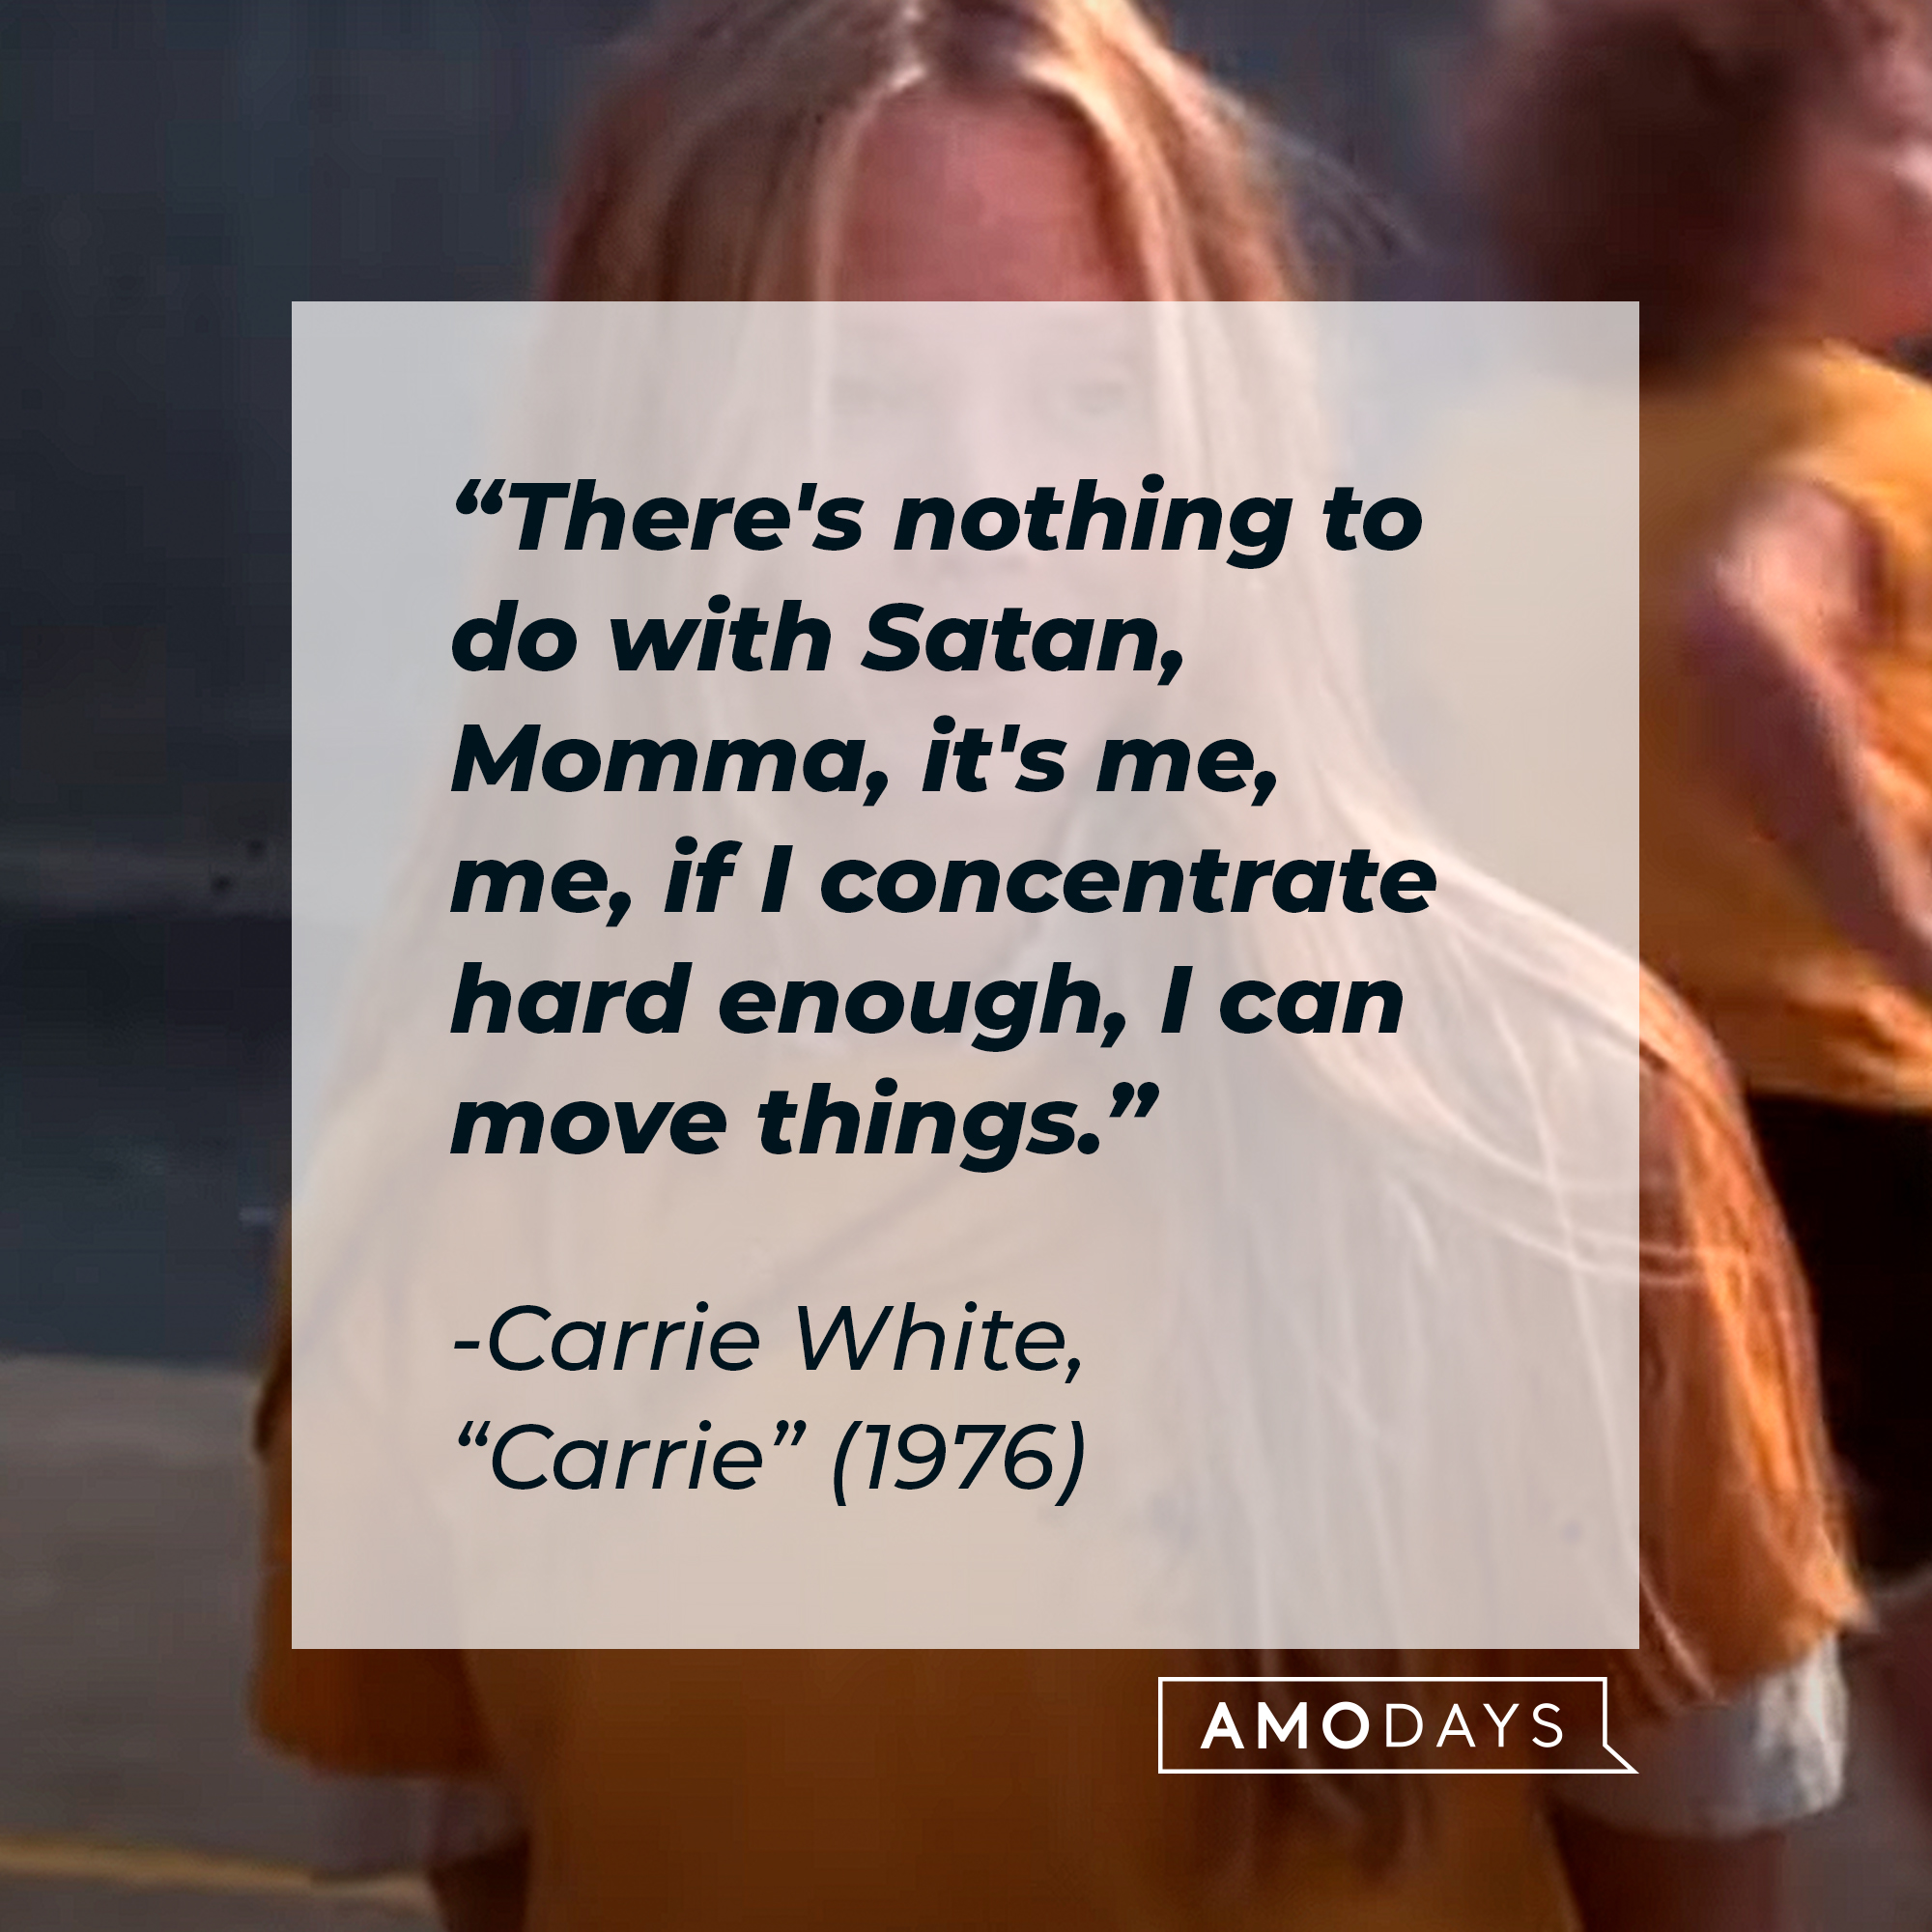 Carrie White's quote: "There's nothing to do with Satan, Momma, it's me, me, if I concentrate hard enough, I can move things." | Source: youtube.com/MGMStudios